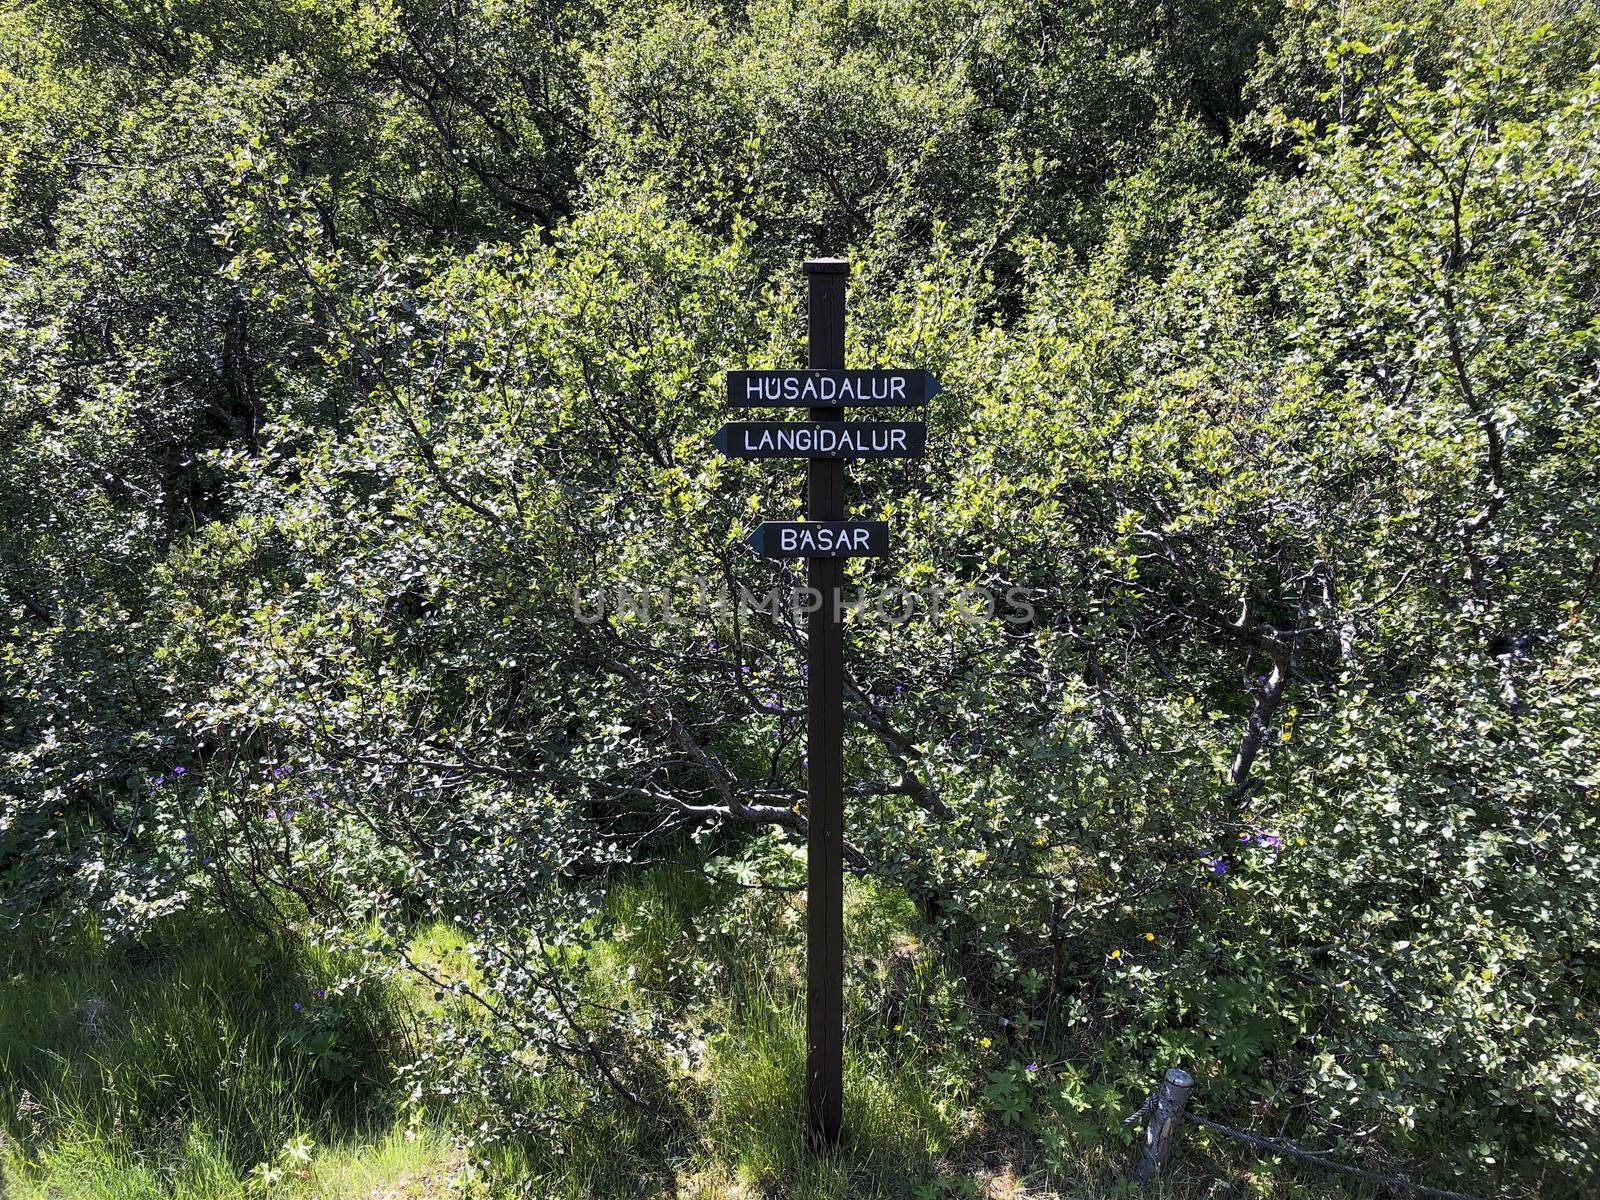 Directional sign pole on Laugavegur hiking trail, pointing to husadalur, langidalur and basar. by kb79